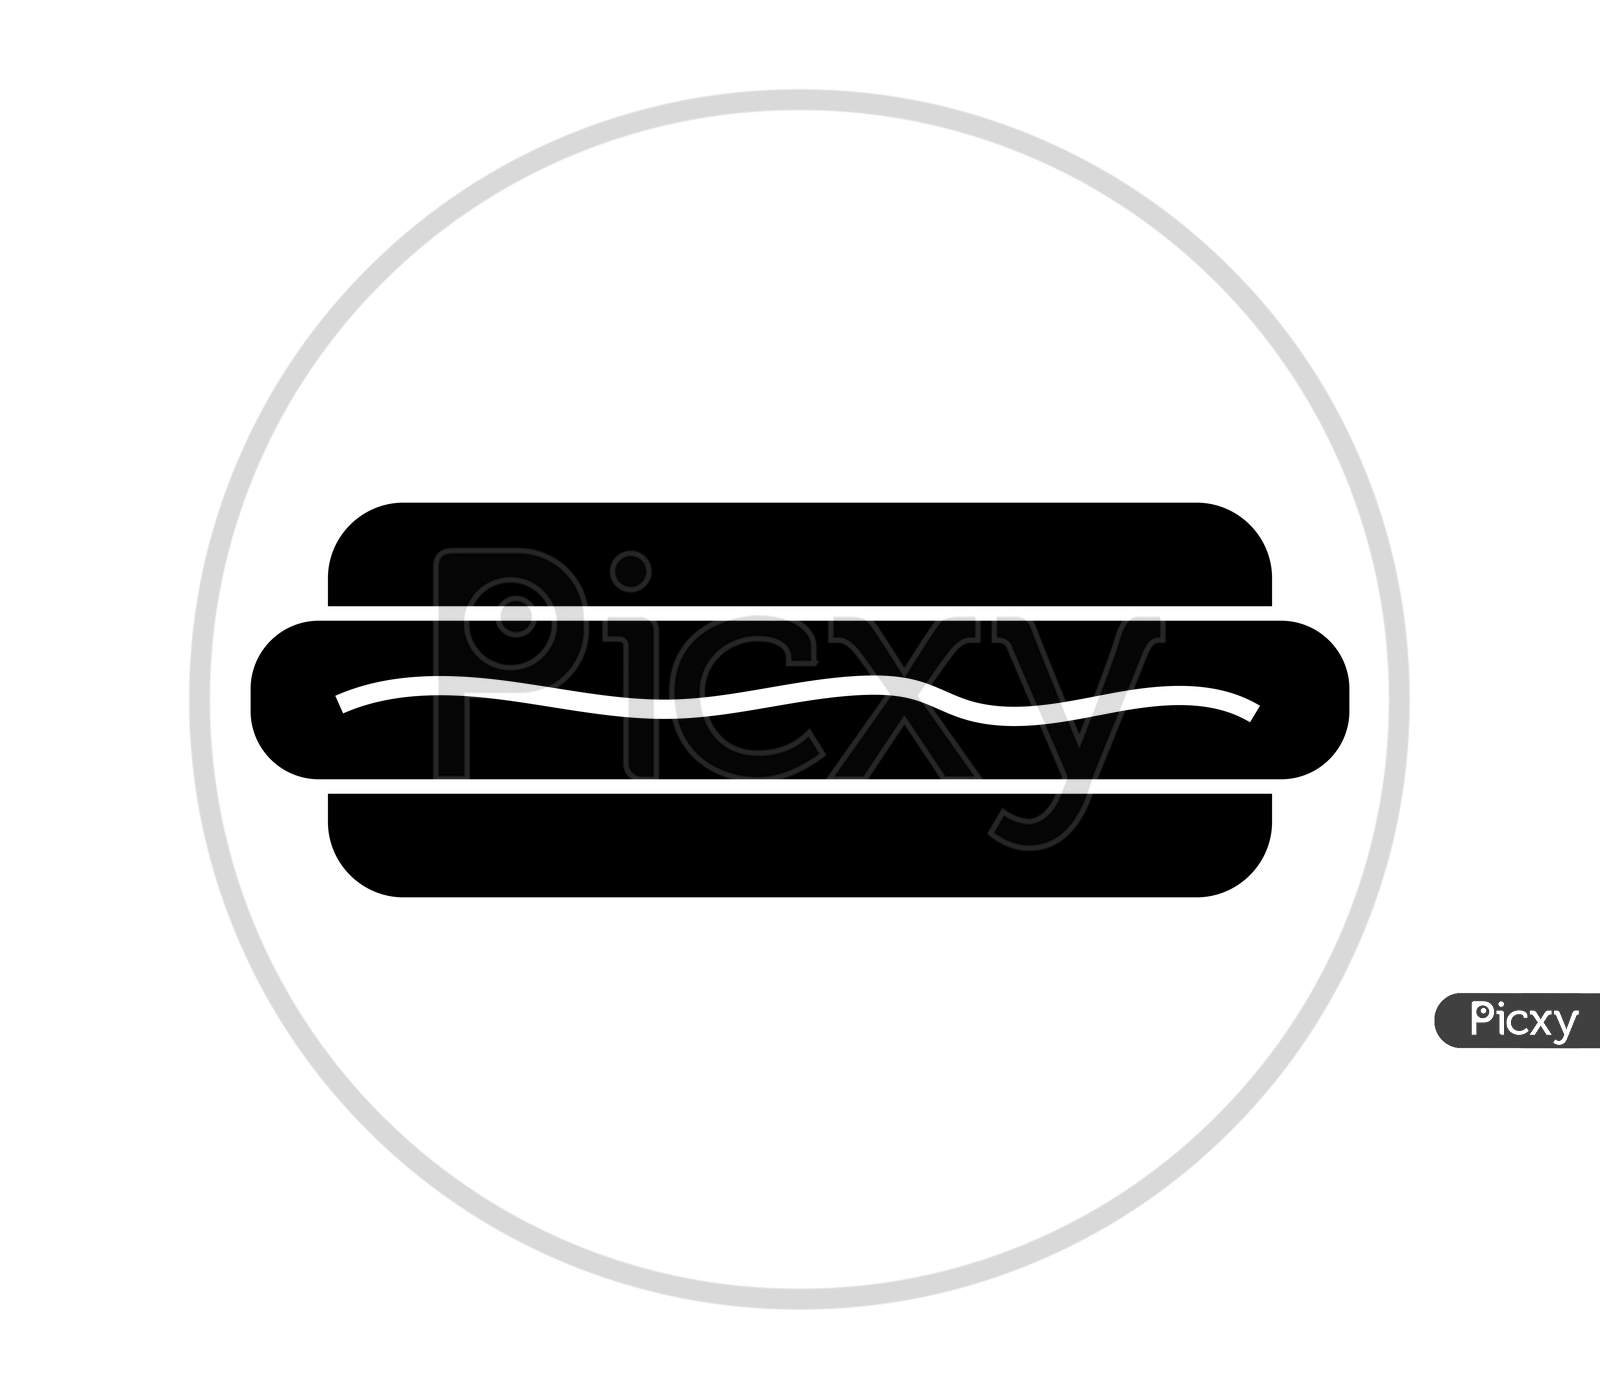 Hot Dog Icon Illustrated In Vector On White Background